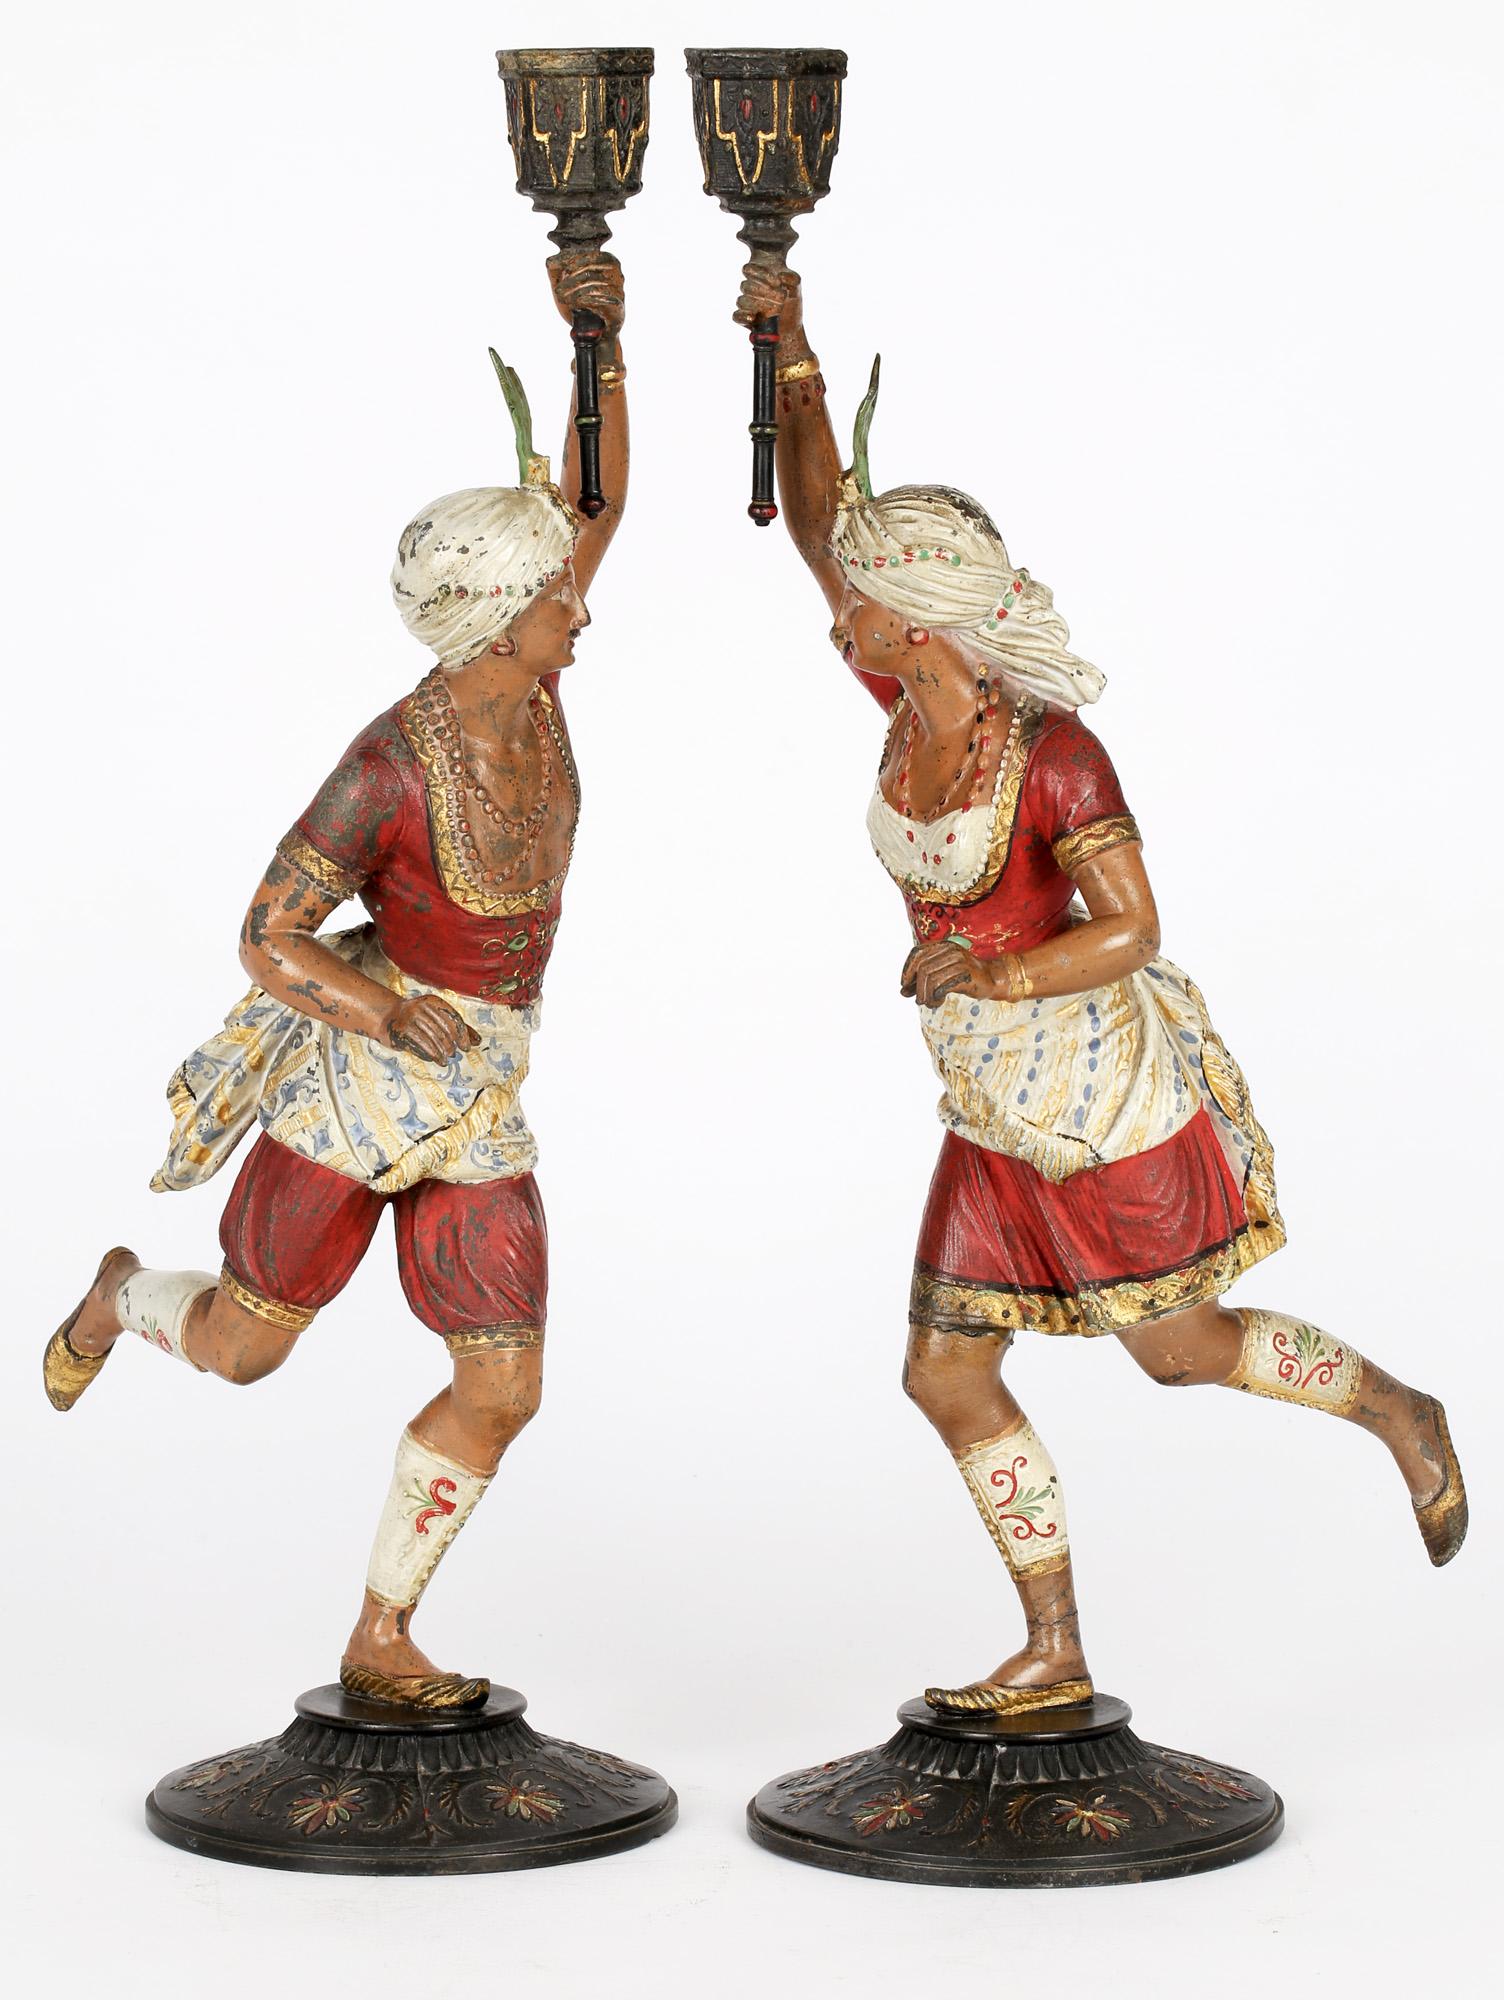 A wonderful pair of Continental, possibly French, cold painted metal Nubian figural candlesticks predating 1910. The candlesticks originate from our own family estate and have been passed down through several generations. The candlesticks portray a